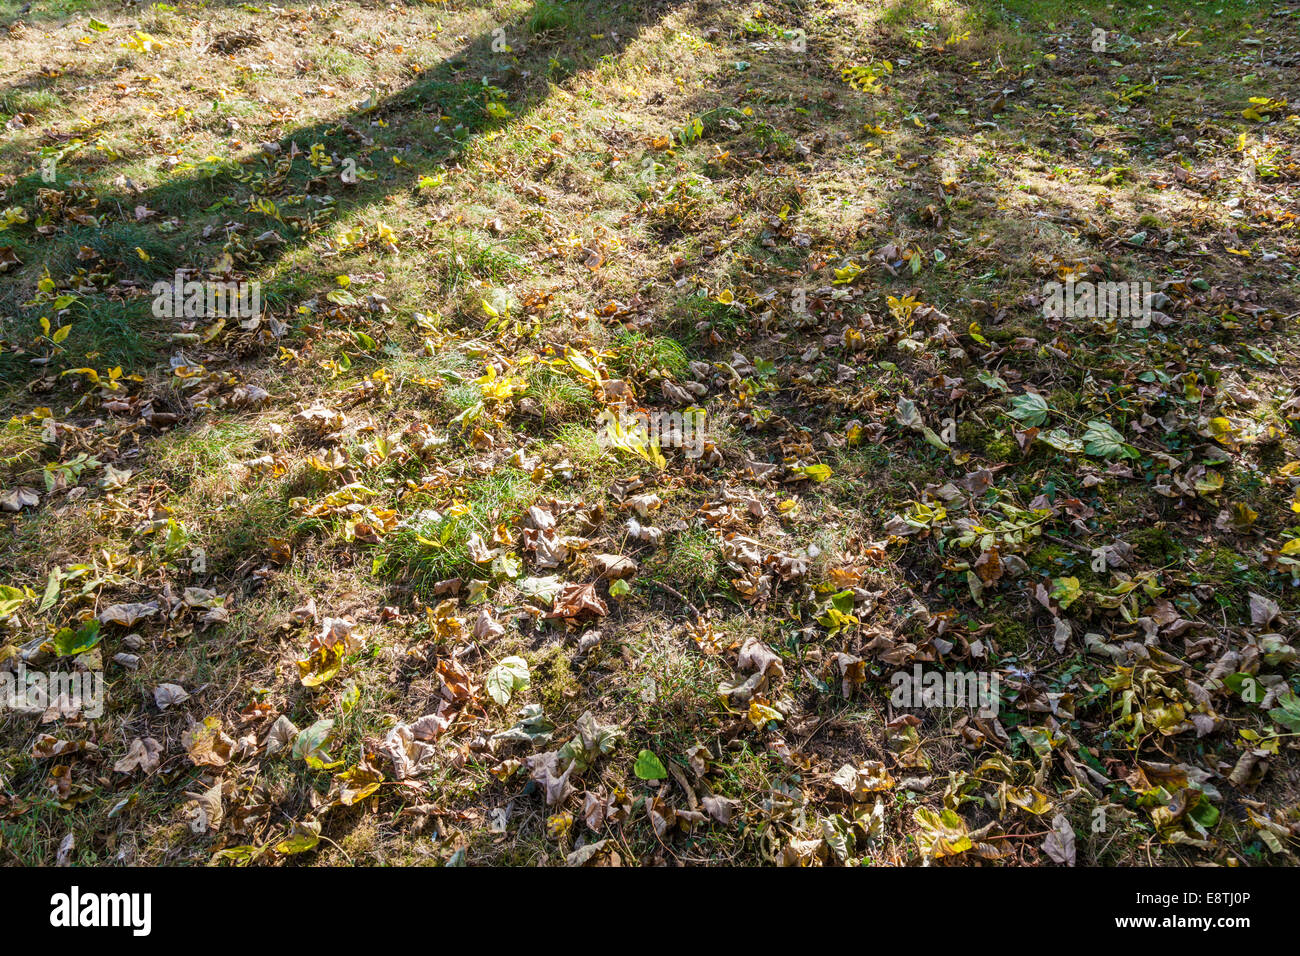 Dead leaves, sunlight and the shadow of a tree on grass during Autumn, England, UK Stock Photo